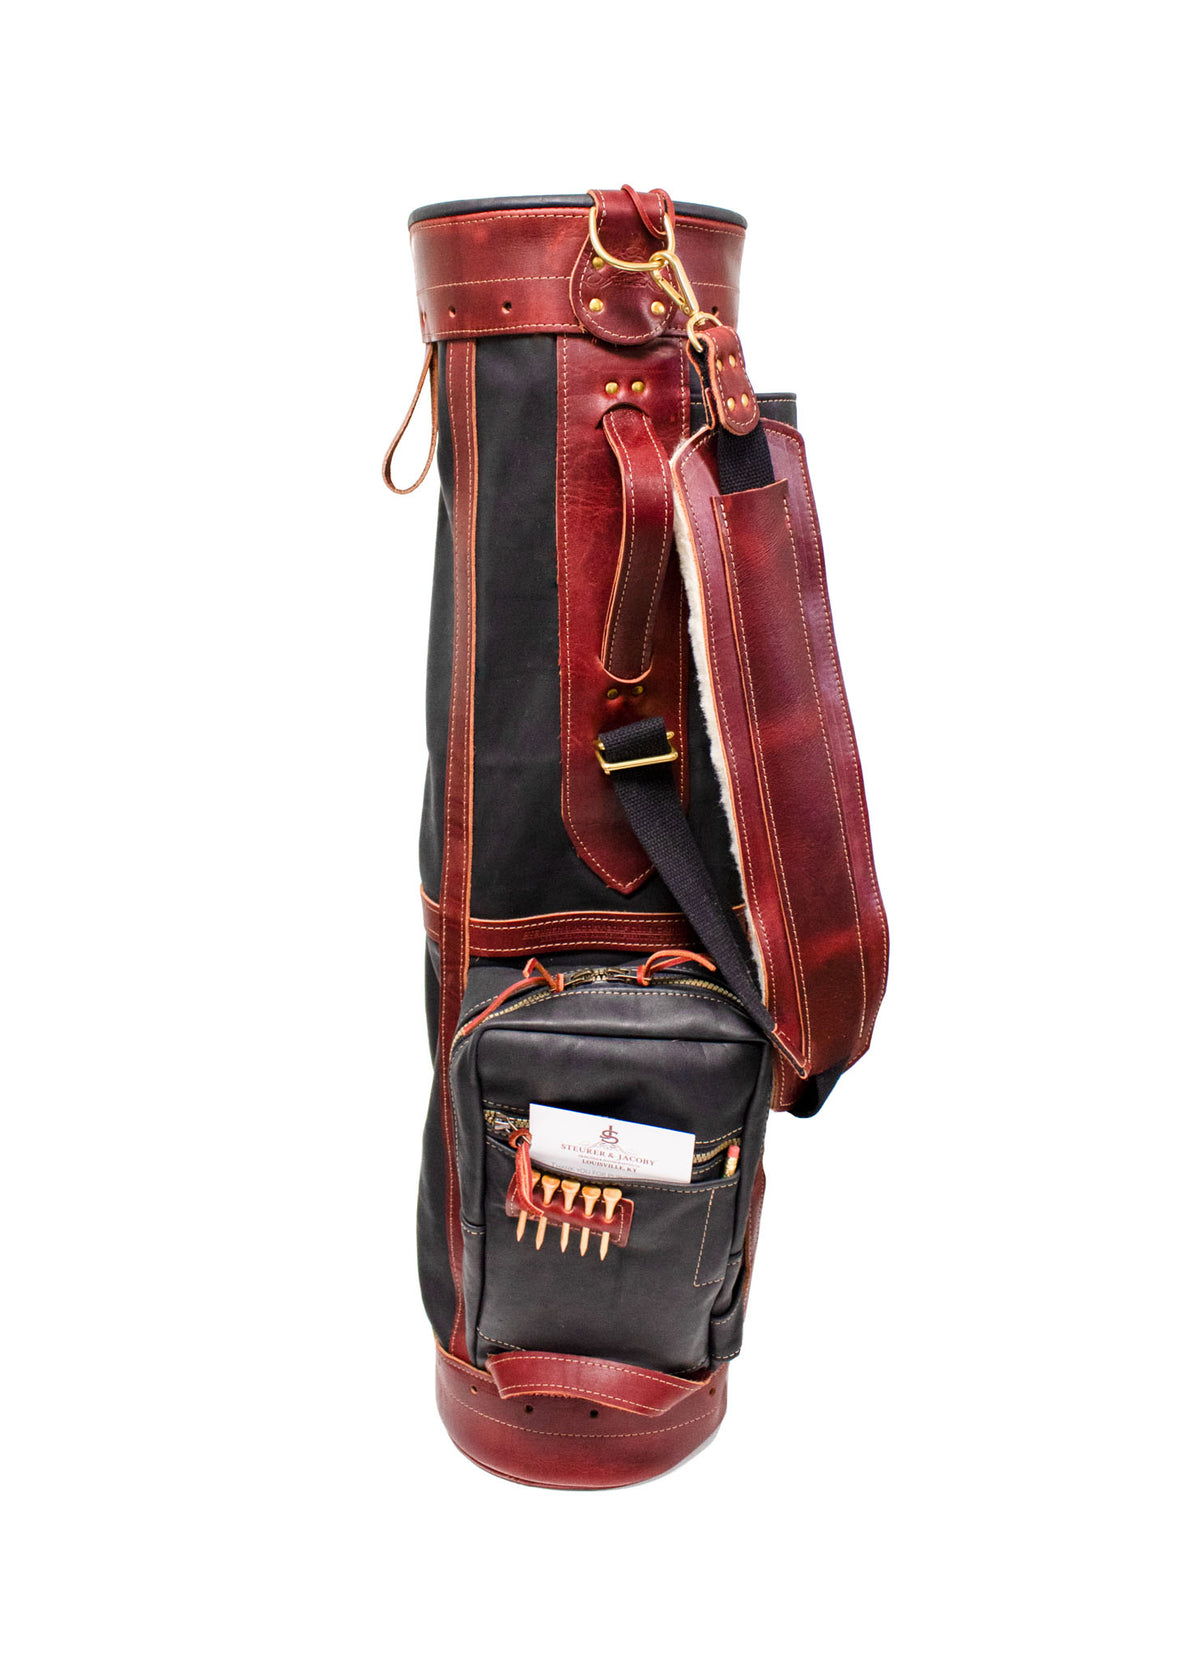 Black Leather with Burgundy Leather Trim Sunday Style Golf Bag- Steurer & Jacoby